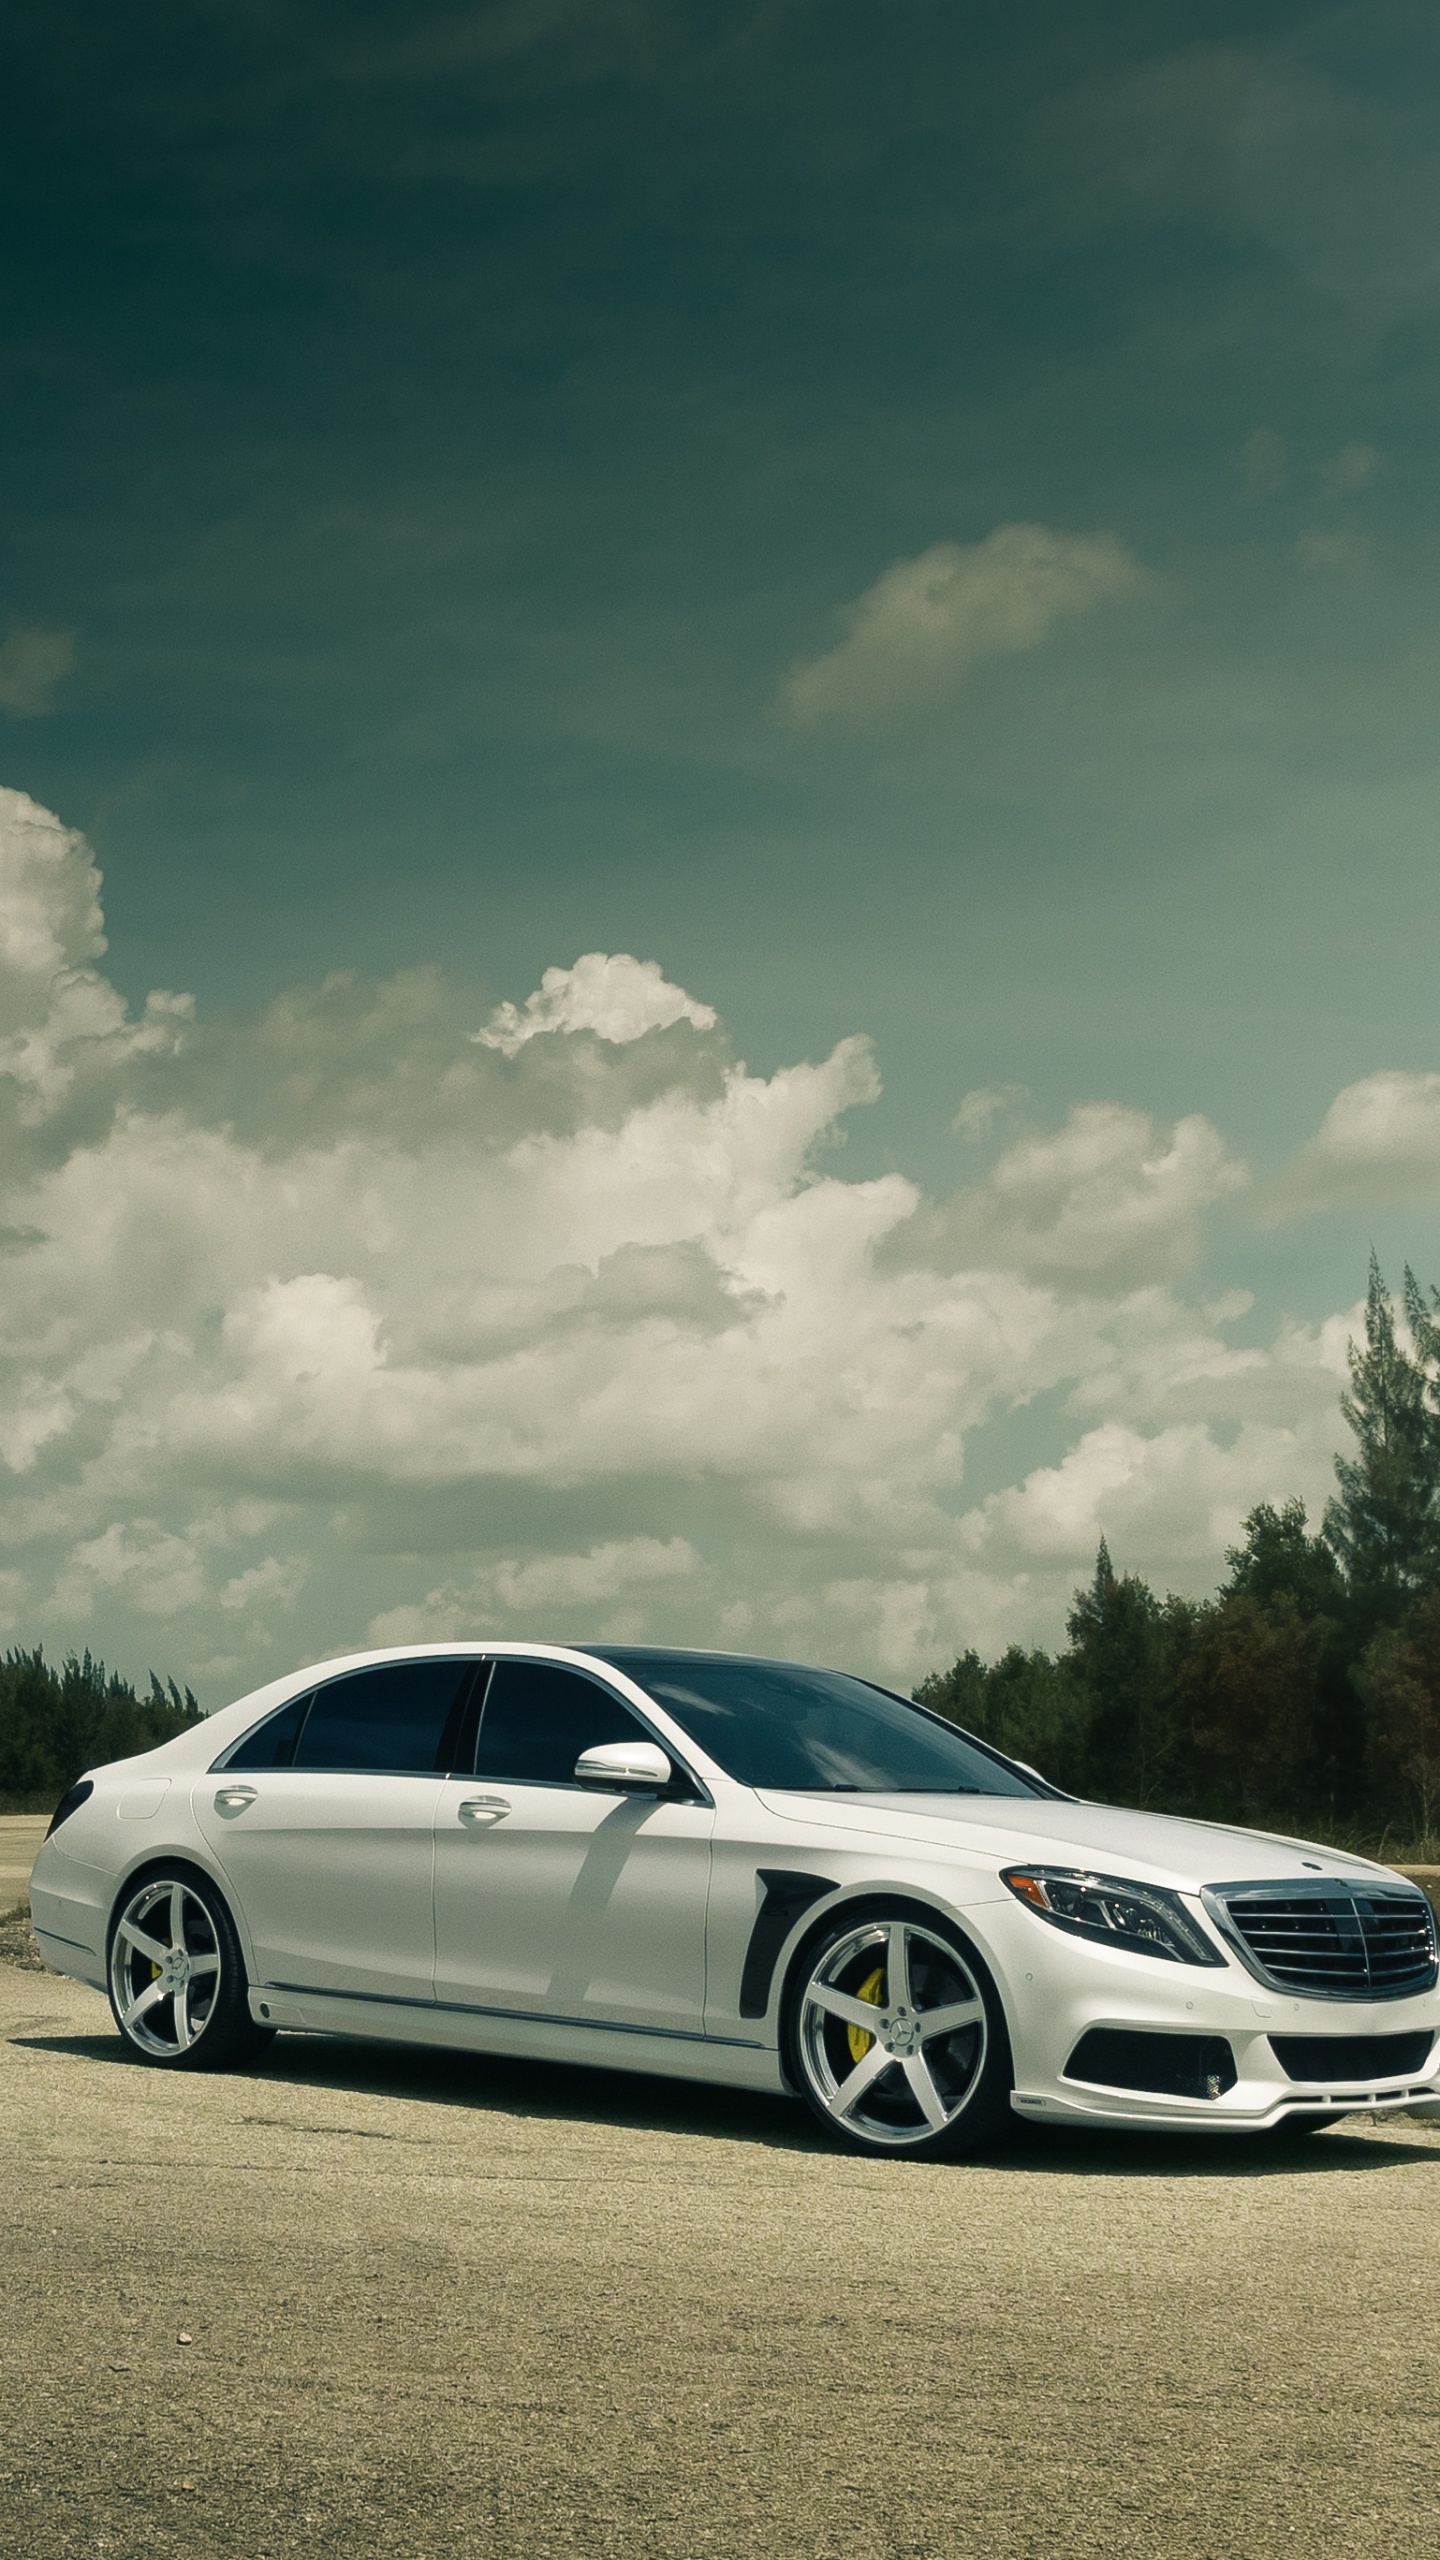 White Sedan on Gray Asphalt Road Under White Clouds and Blue Sky During Daytime. Wallpaper in 1440x2560 Resolution